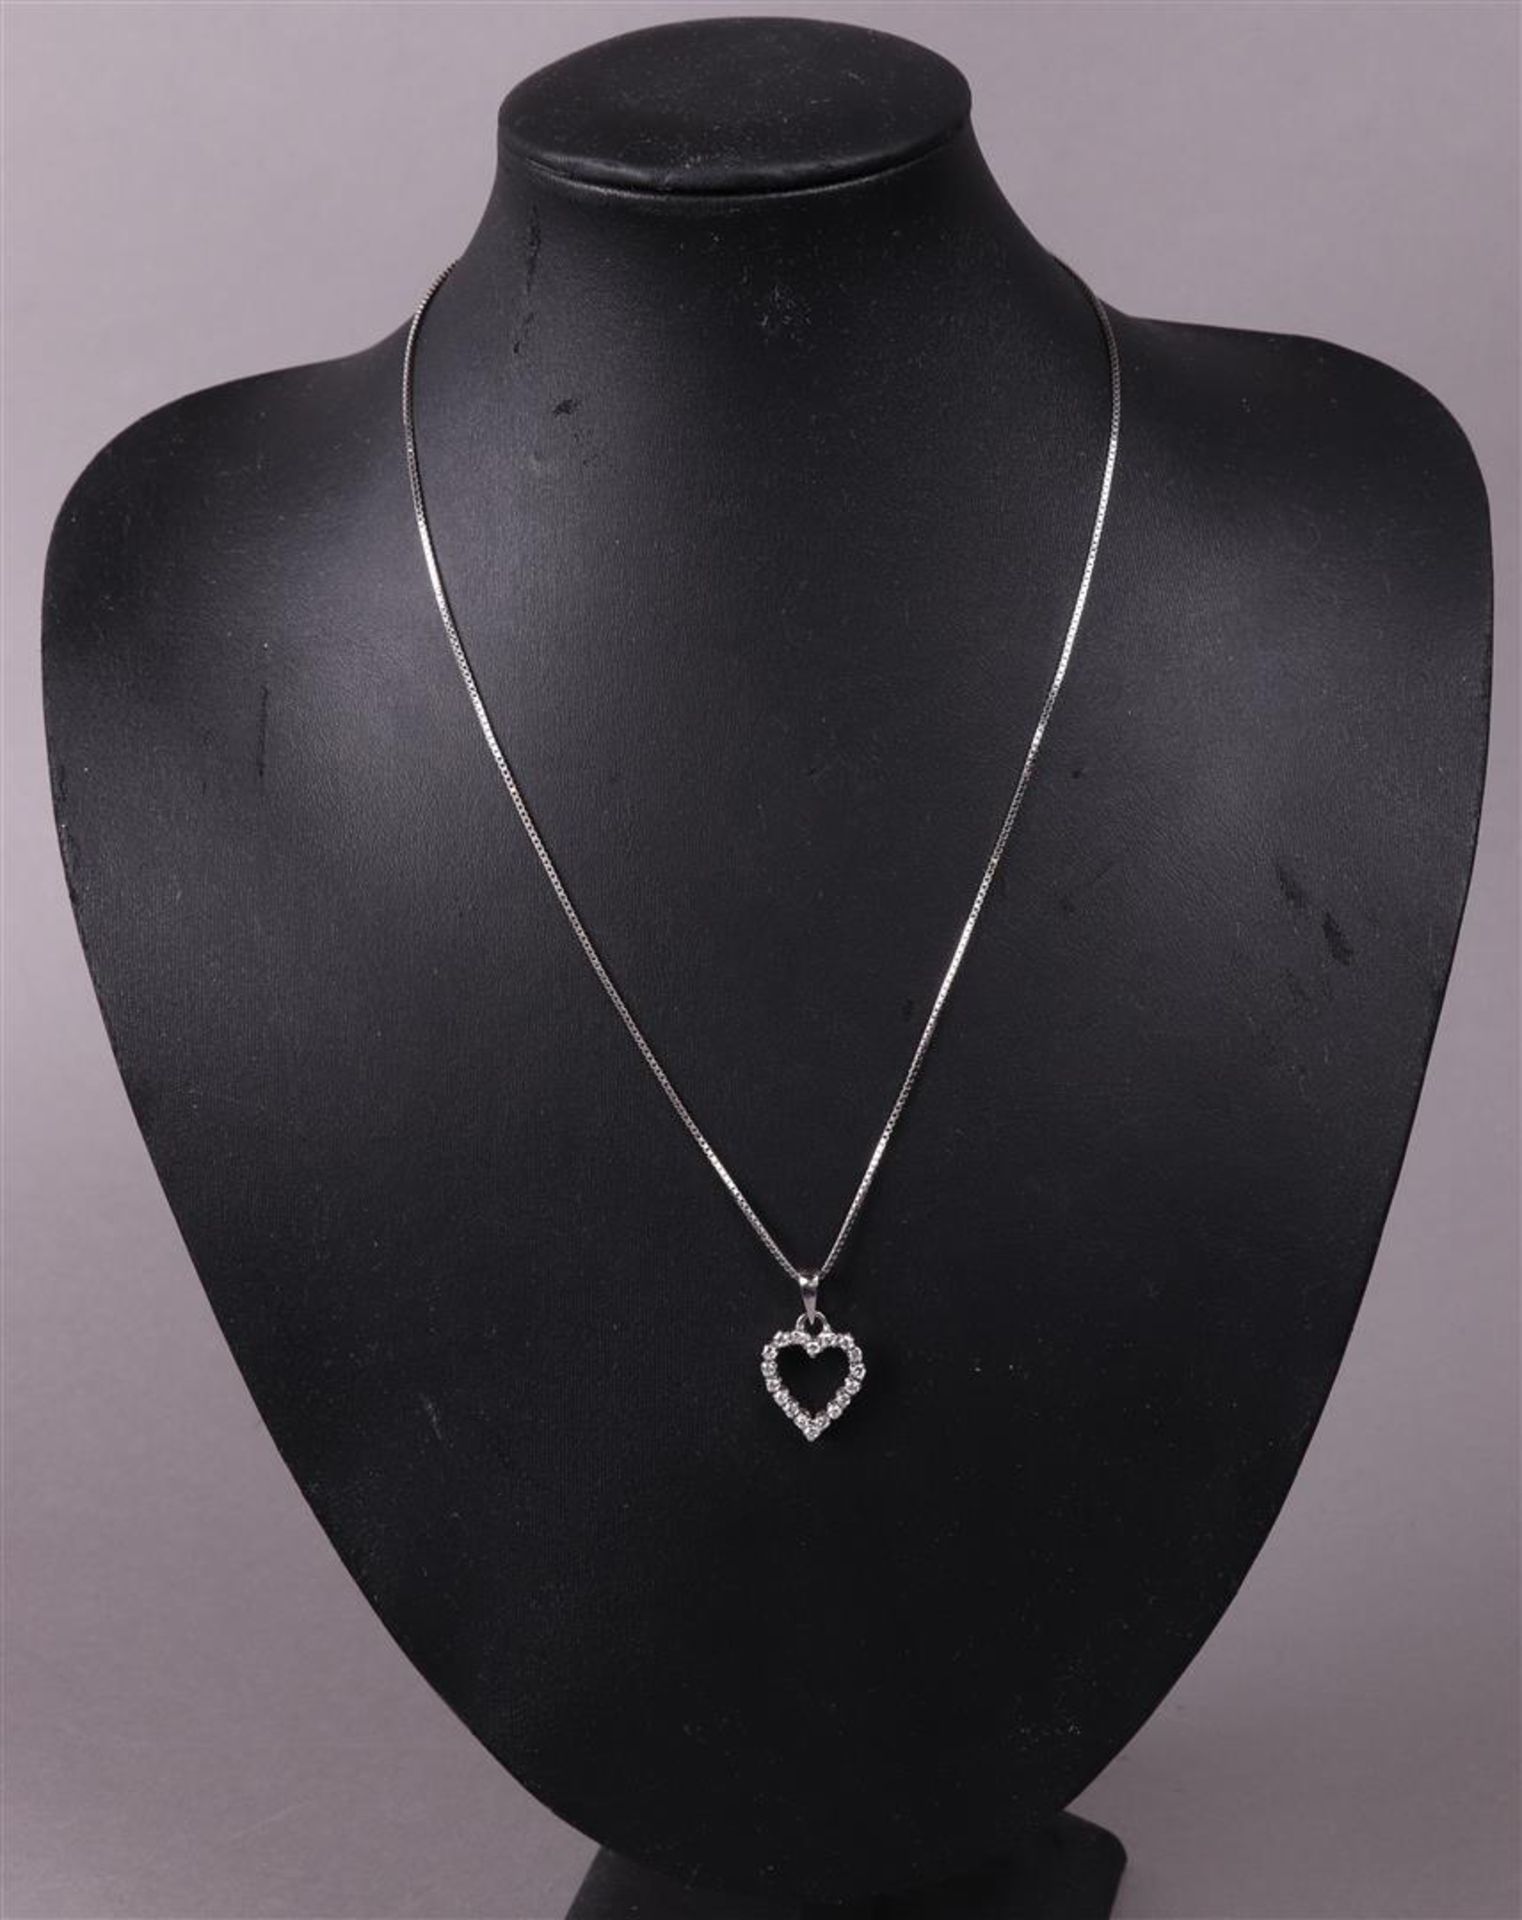 A white gold (14 kt) Ventian necklace with an open heart pendant (18 kt)